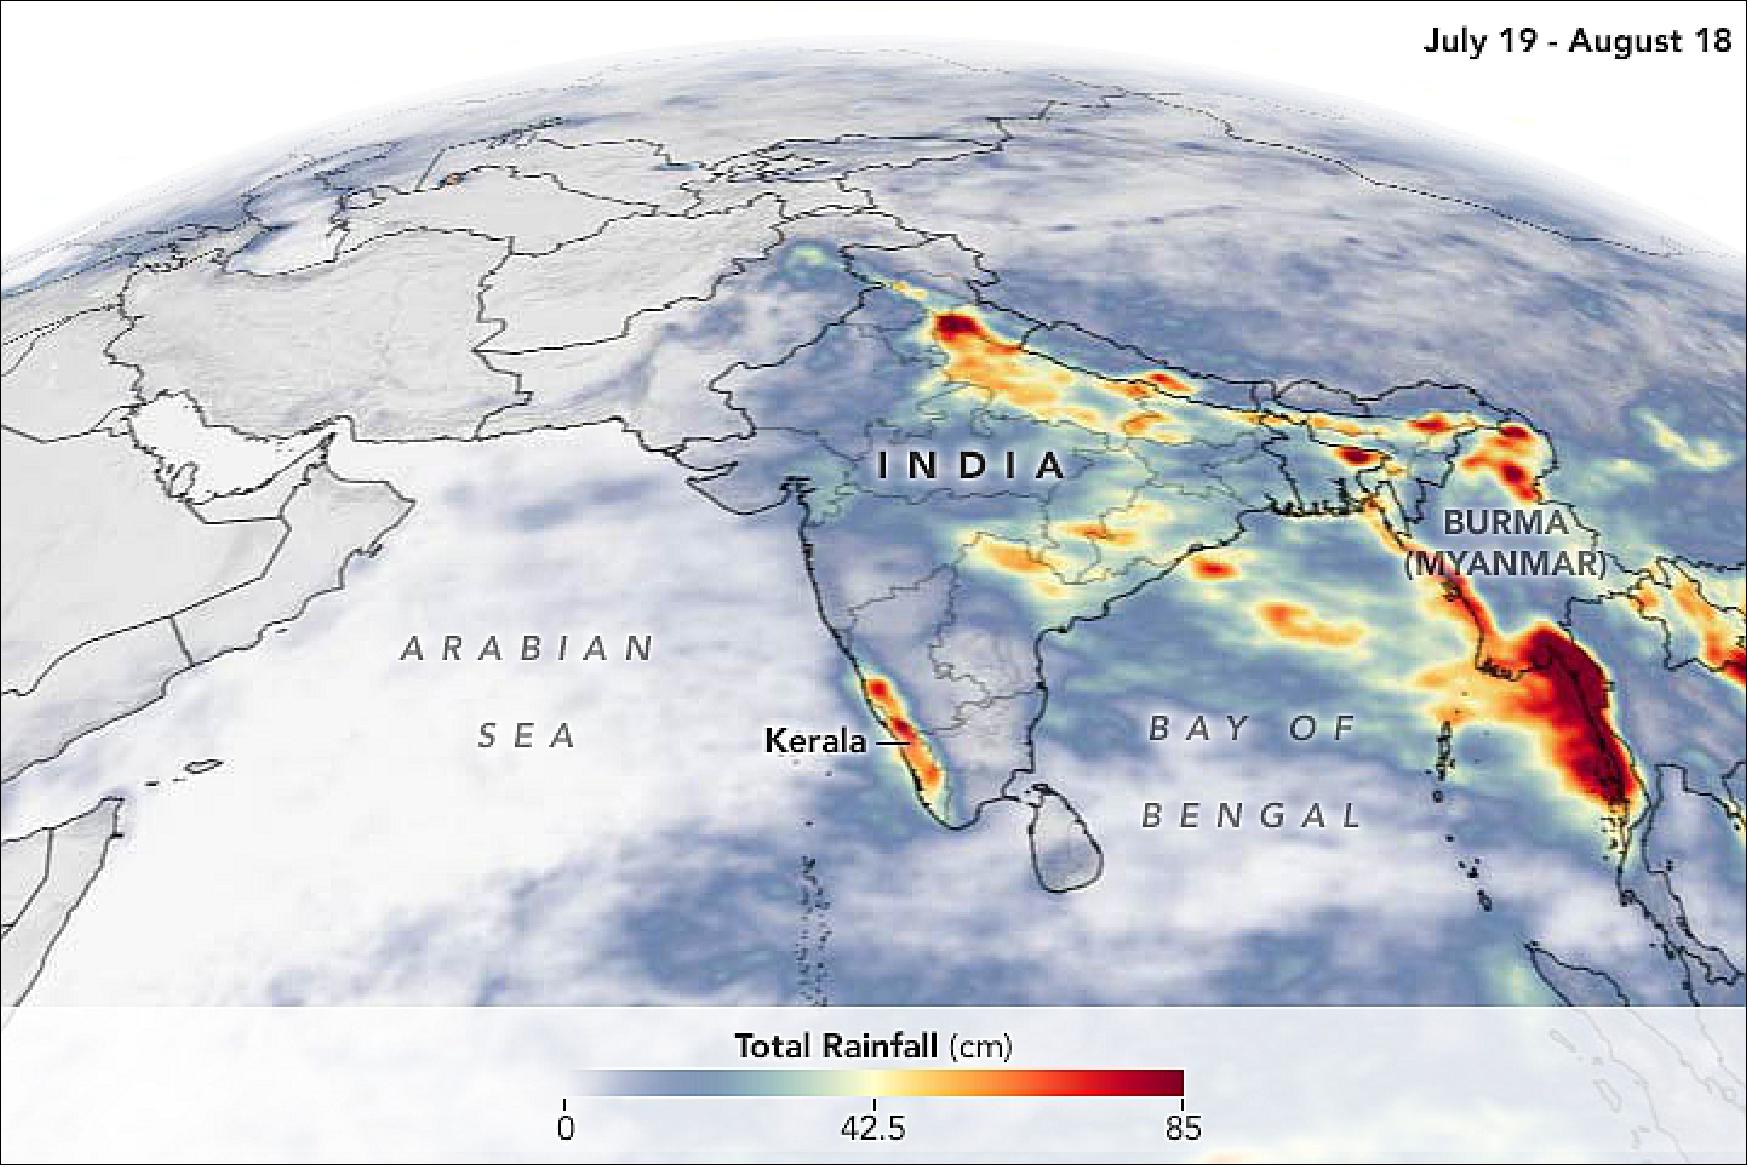 Figure 32: The image shows satellite-based rainfall accumulation from July 19 to August 18, 2018. Rainfall peaked in Kerala on July 20 and again reached abnormally high levels between August 8 and 16. Since the beginning of June, the region received 42 percent more rainfall than normal for this time period. In the first 20 days of August, the region experienced 164 percent more rain than normal (image credit: NASA Earth Observatory, images by Joshua Stevens, using IMERG data from the GPM (Global Precipitation Mission) at NASA/GSFC, story by Kasha Patel)